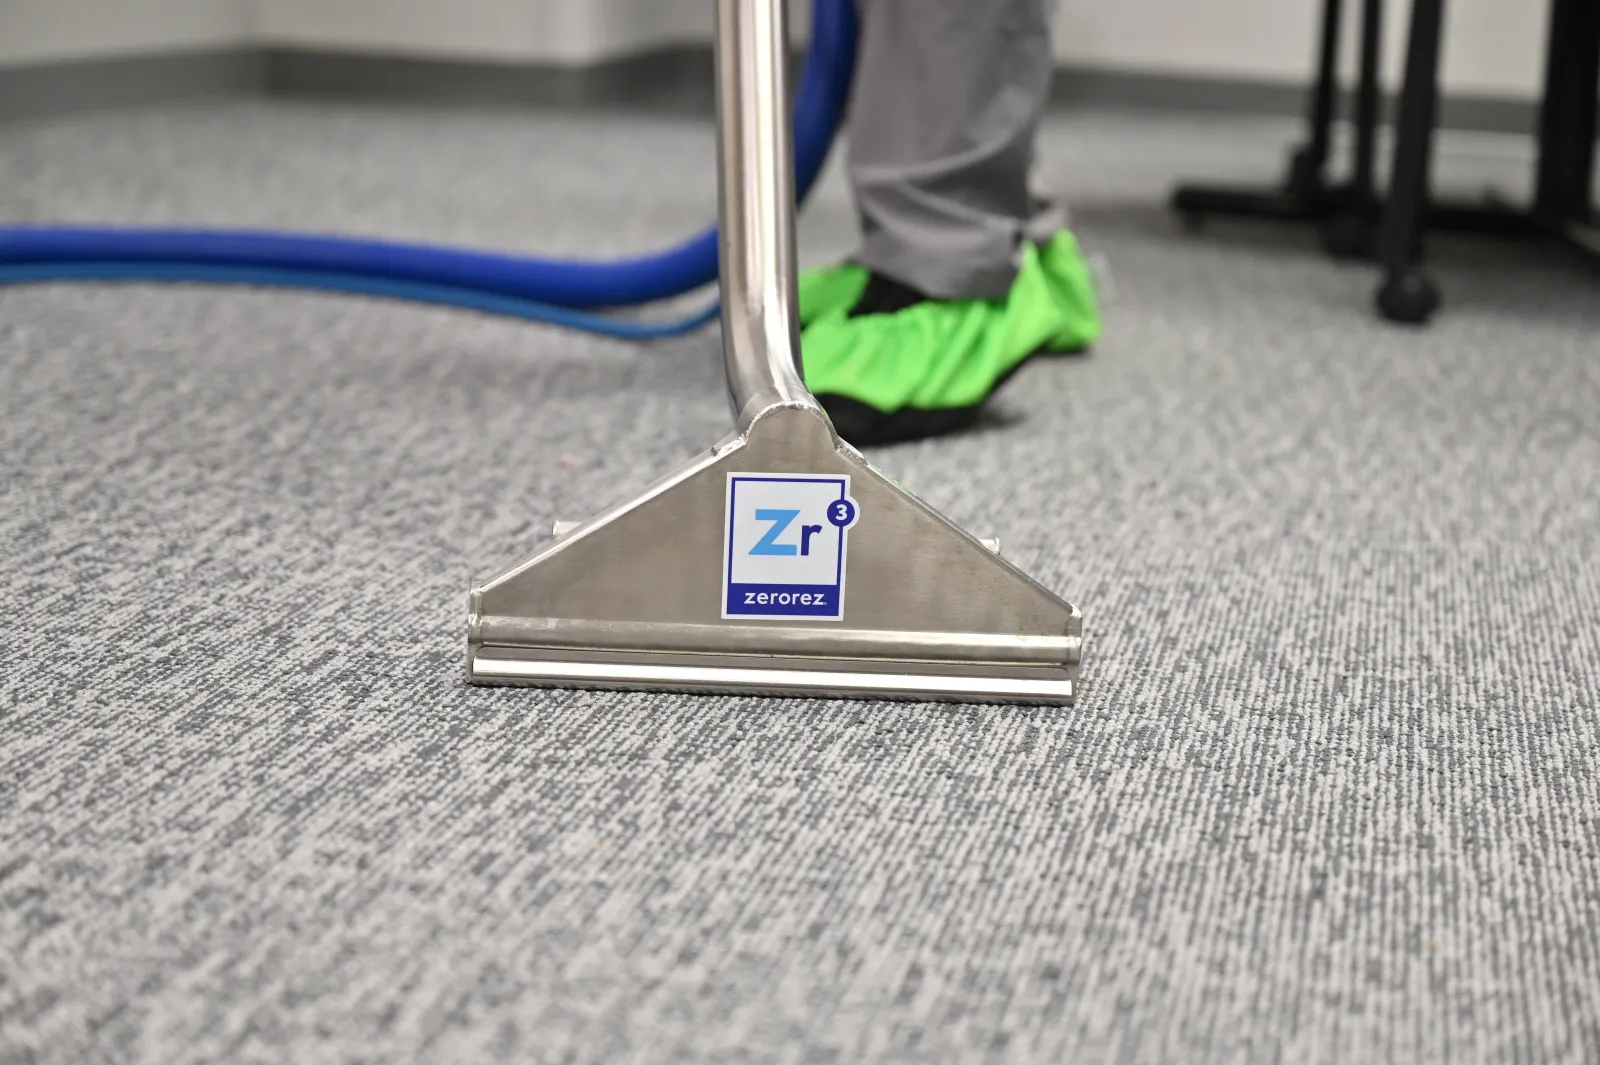 Zerorez Zr Wand being used to clean an olefin carpet in an office setting